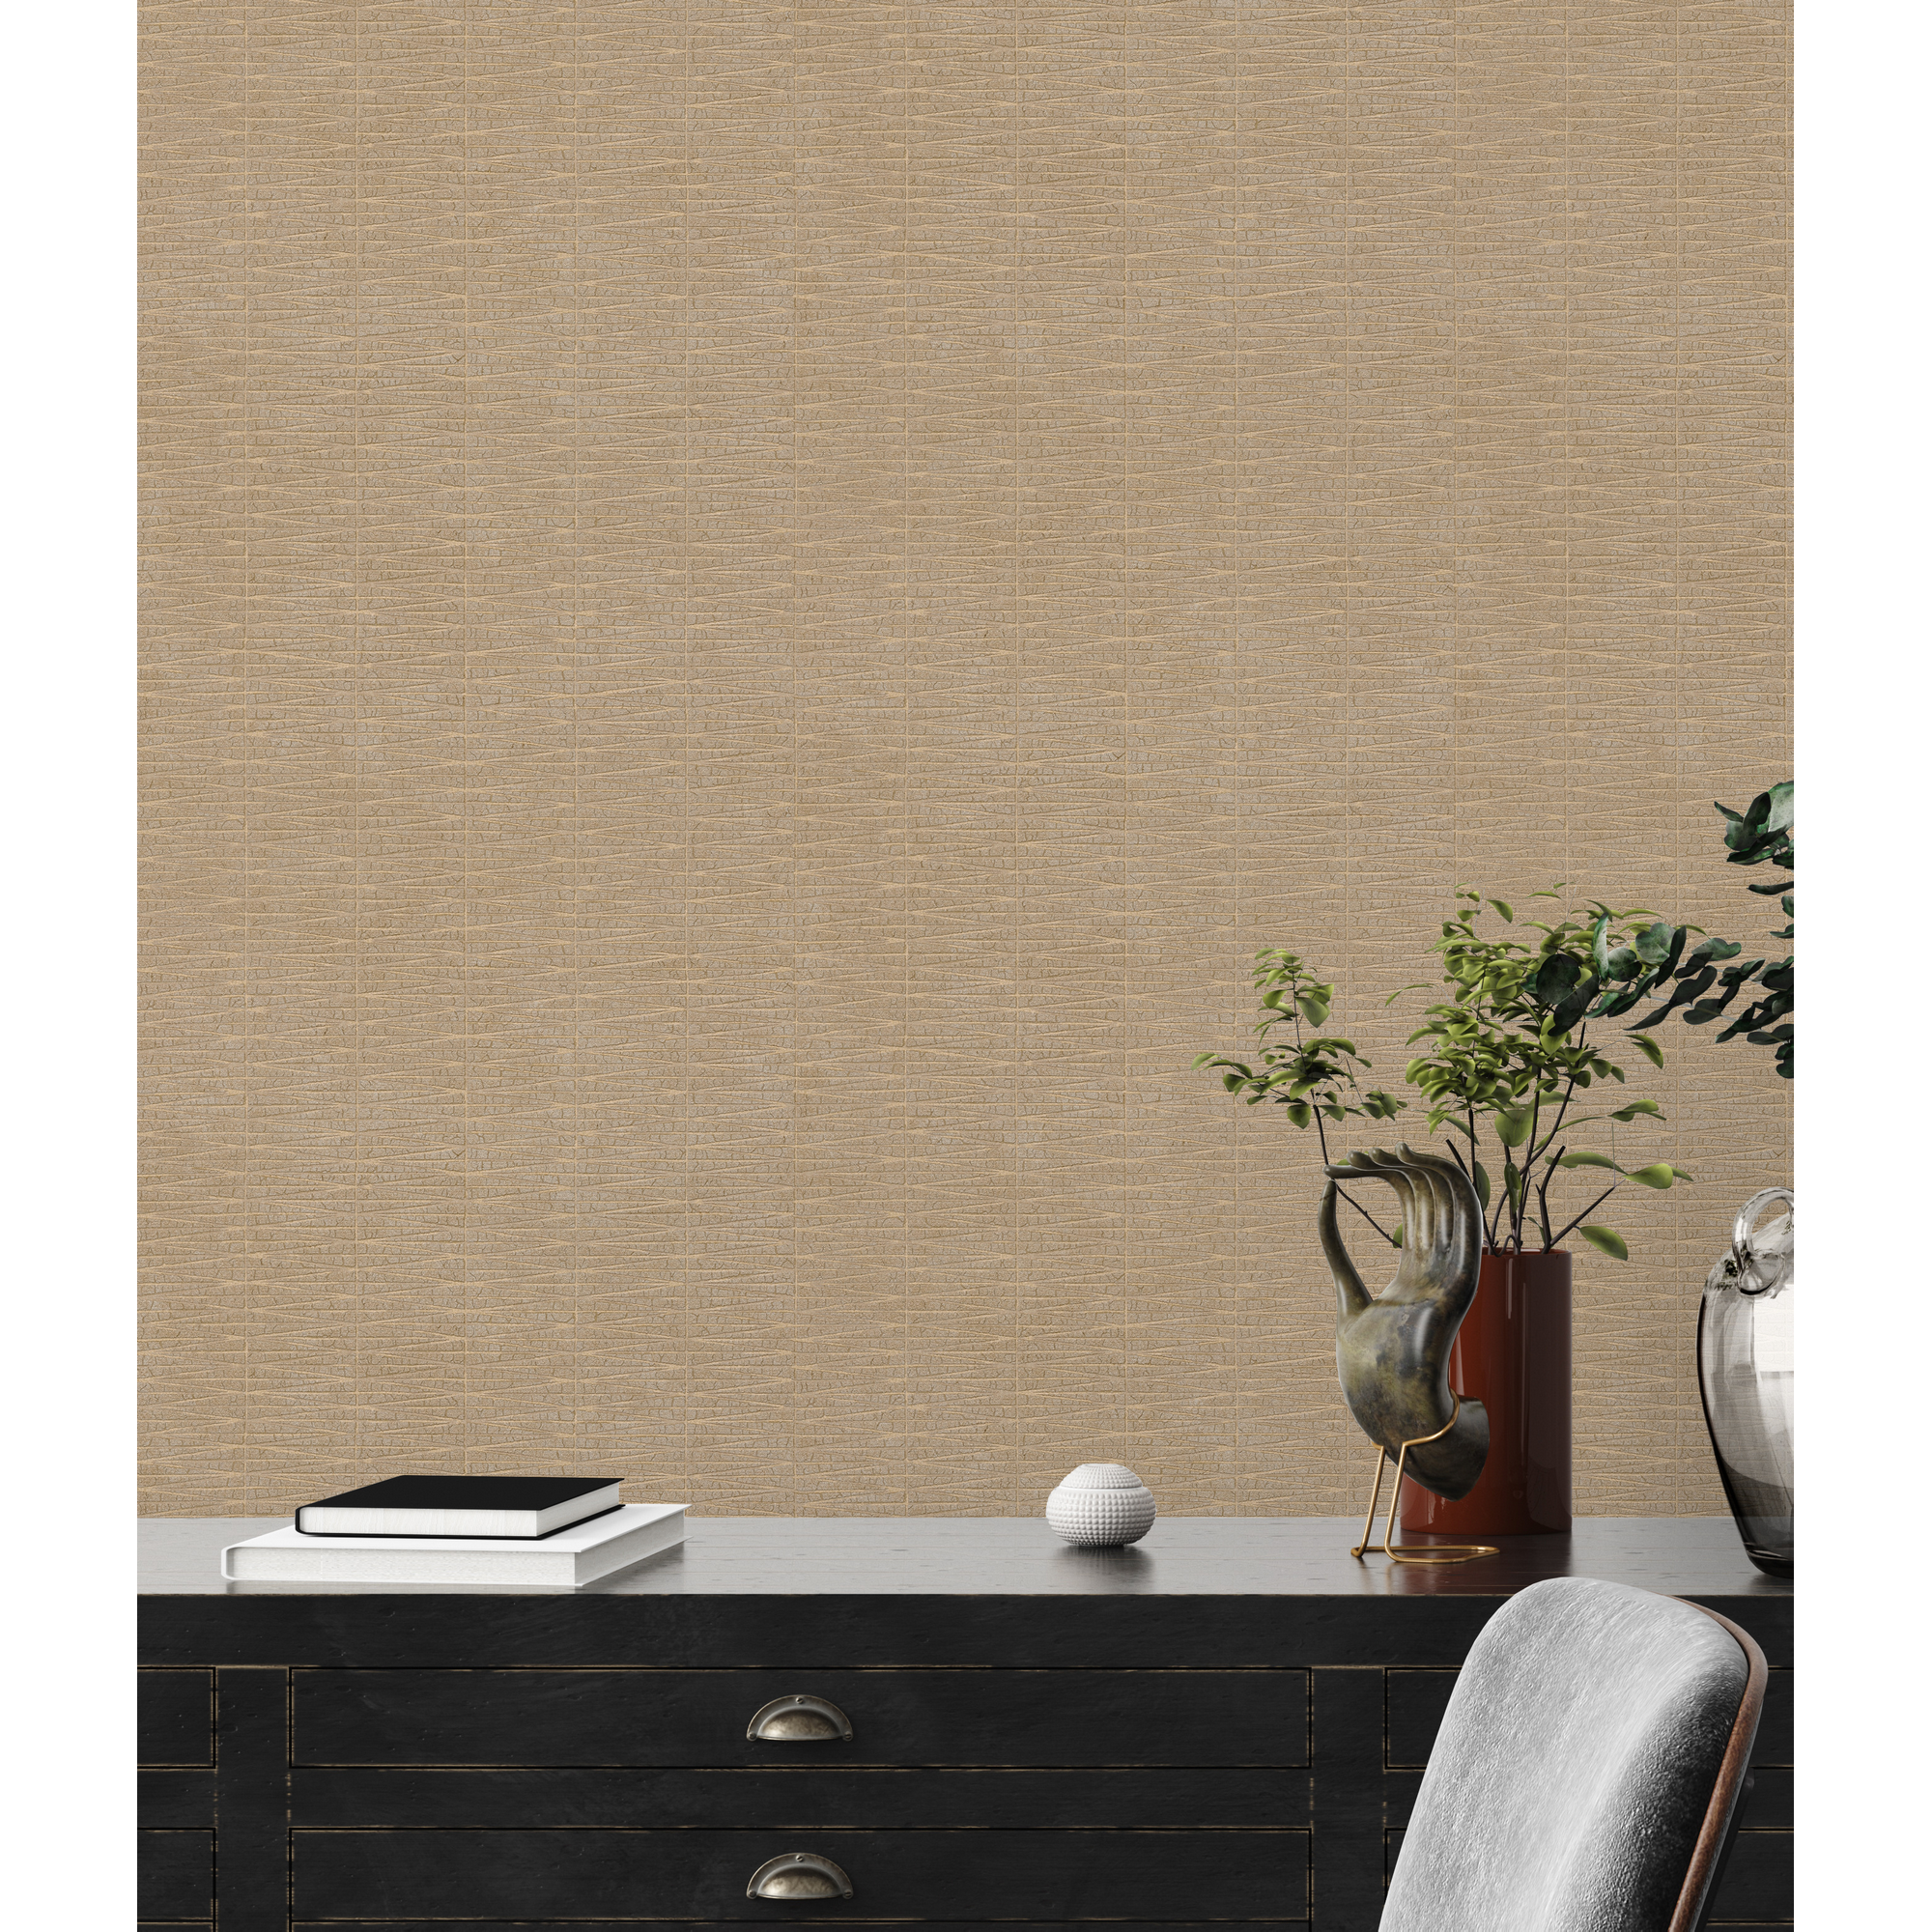 Vliestapete 'Hygge 2' Linienmuster braun 10,05 x 0,53 m + product picture